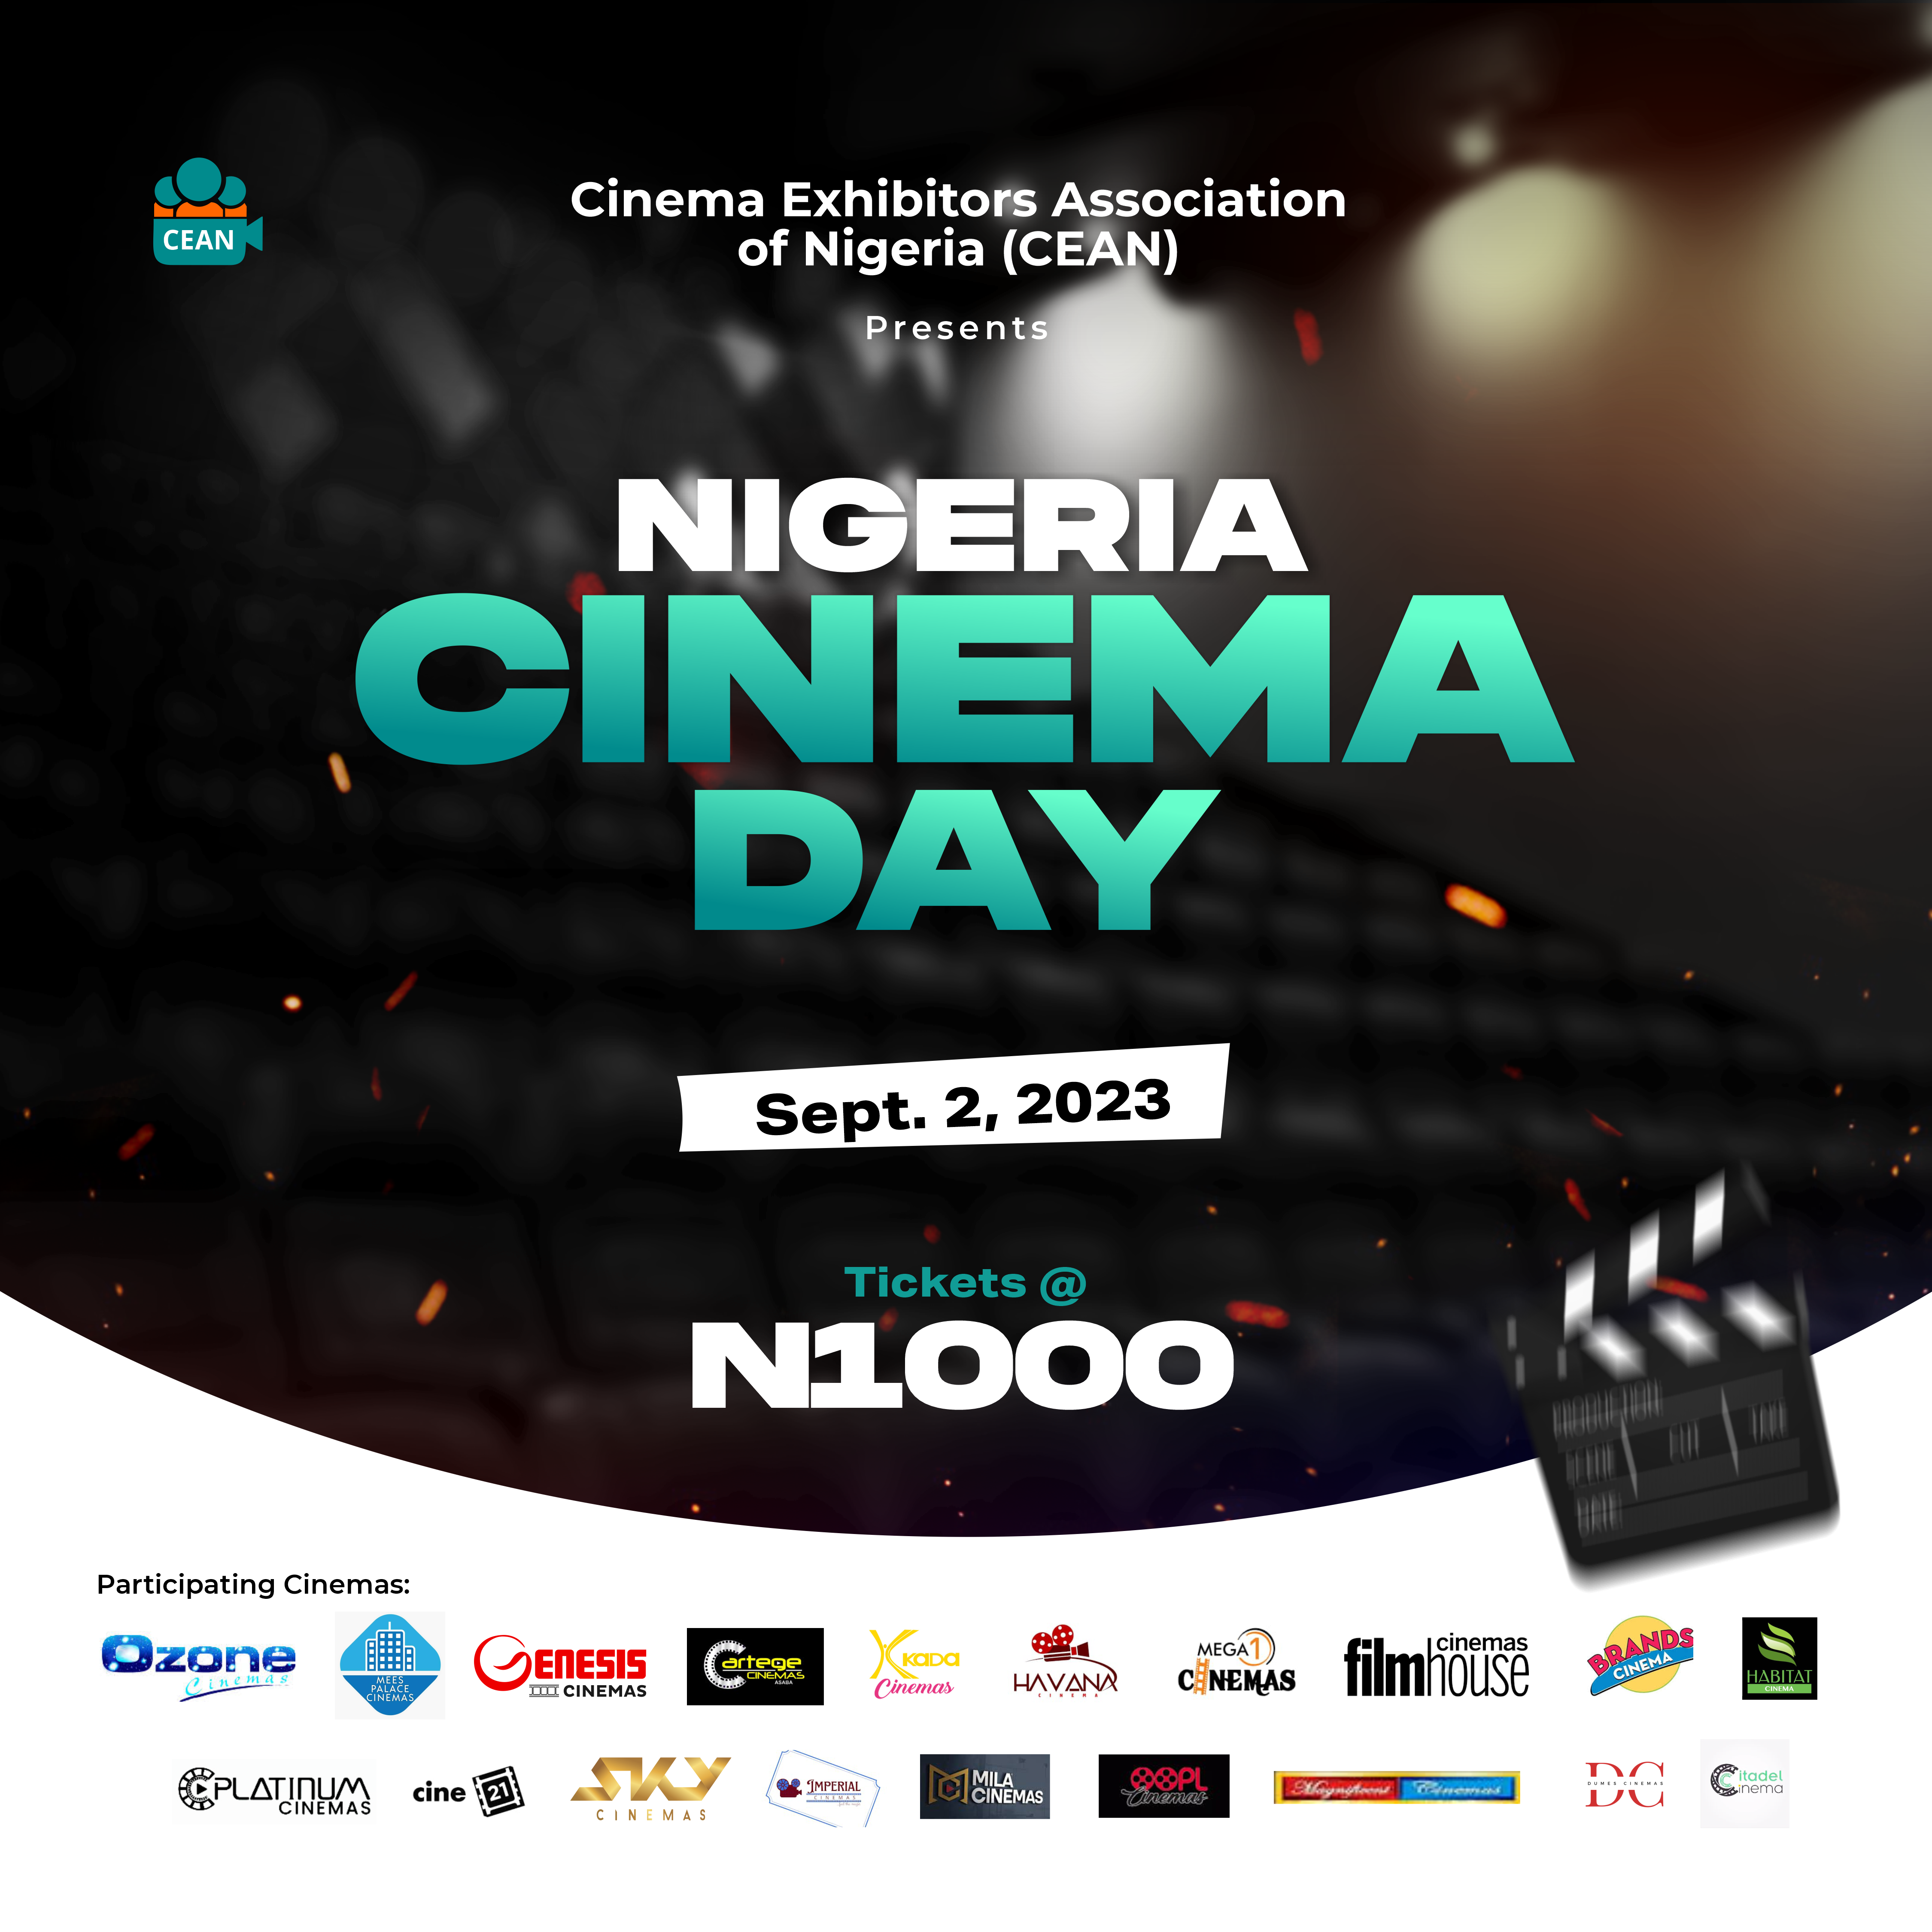 Cinema Day 0 - First Ever Nigerian Cinema Day Kicks Off September 2nd, All Movie Tickets Prices Crashed To N1000!